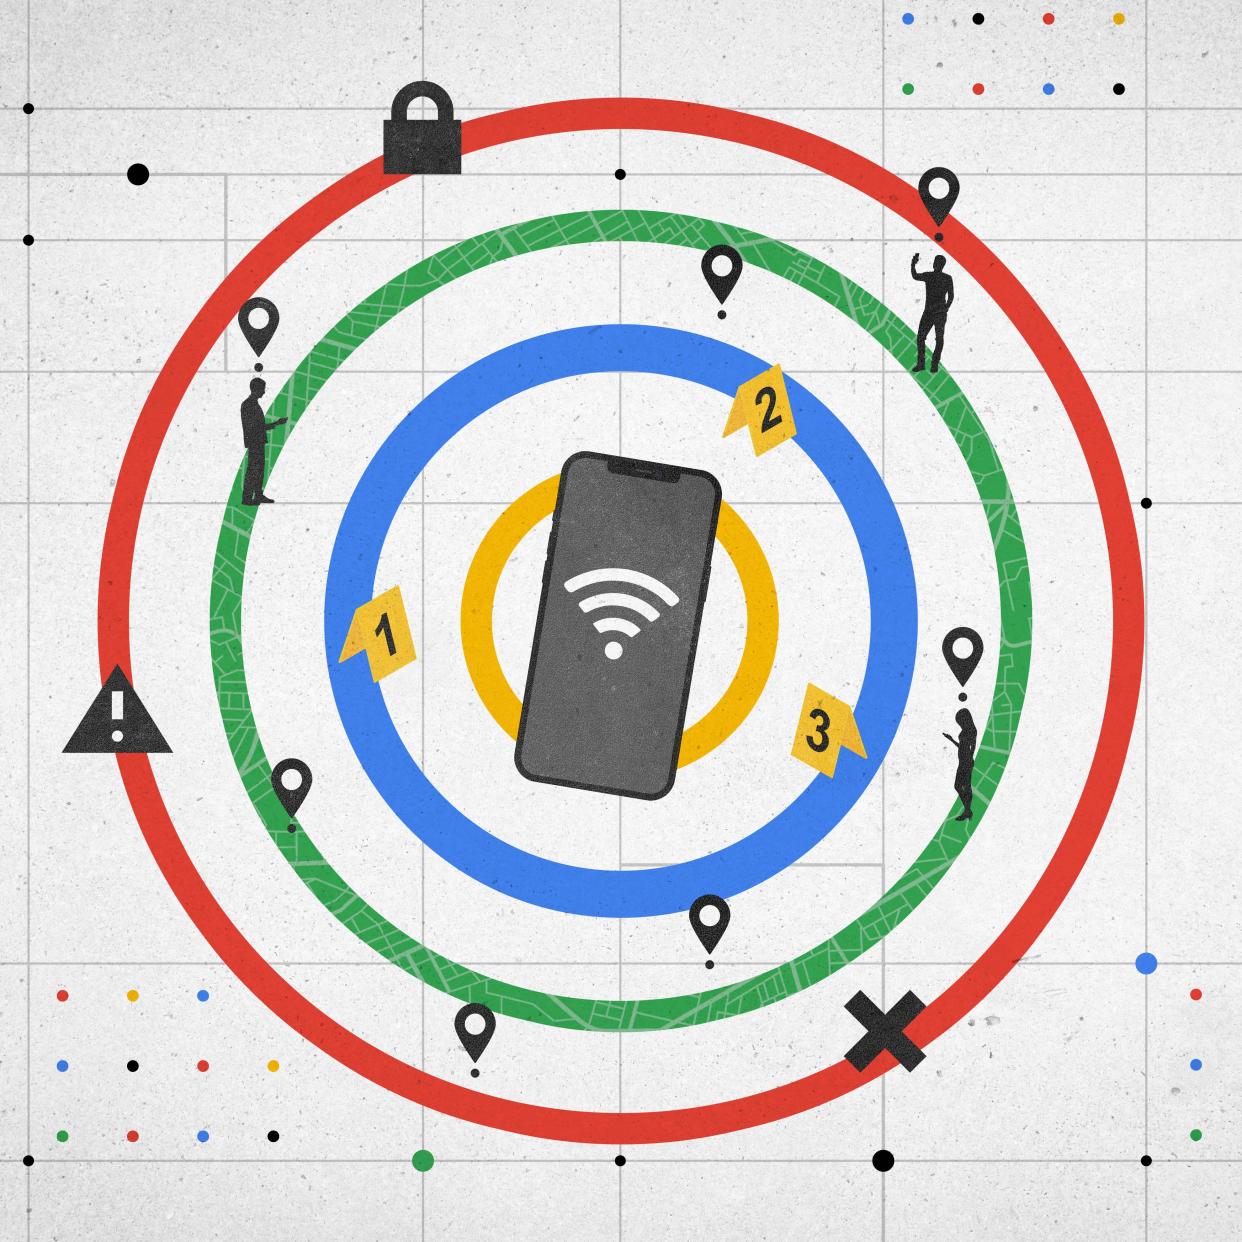 Crime probes increasingly rely on cellphone data, raising questions of privacy and accuracy.